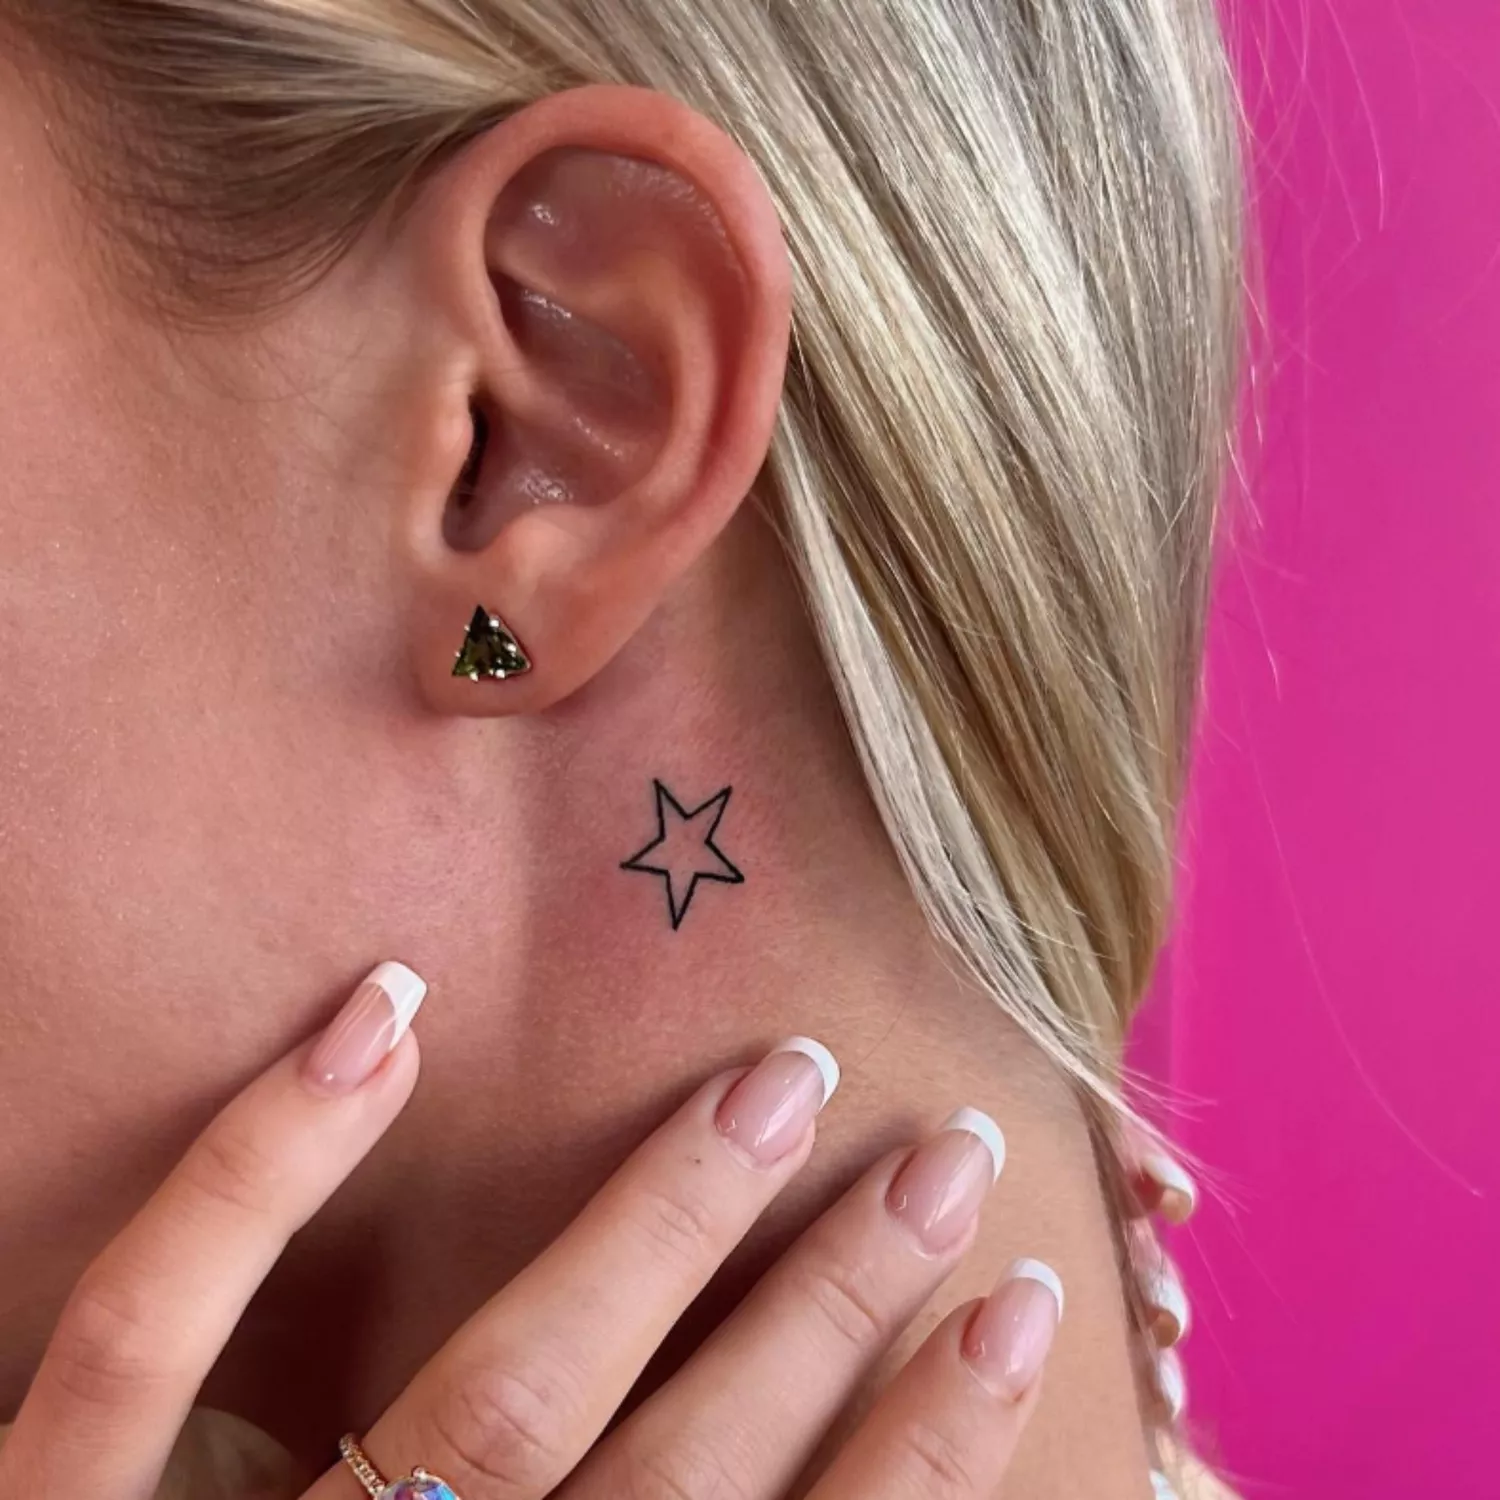 zoomed-in photo of person with star tattoo behind the ear